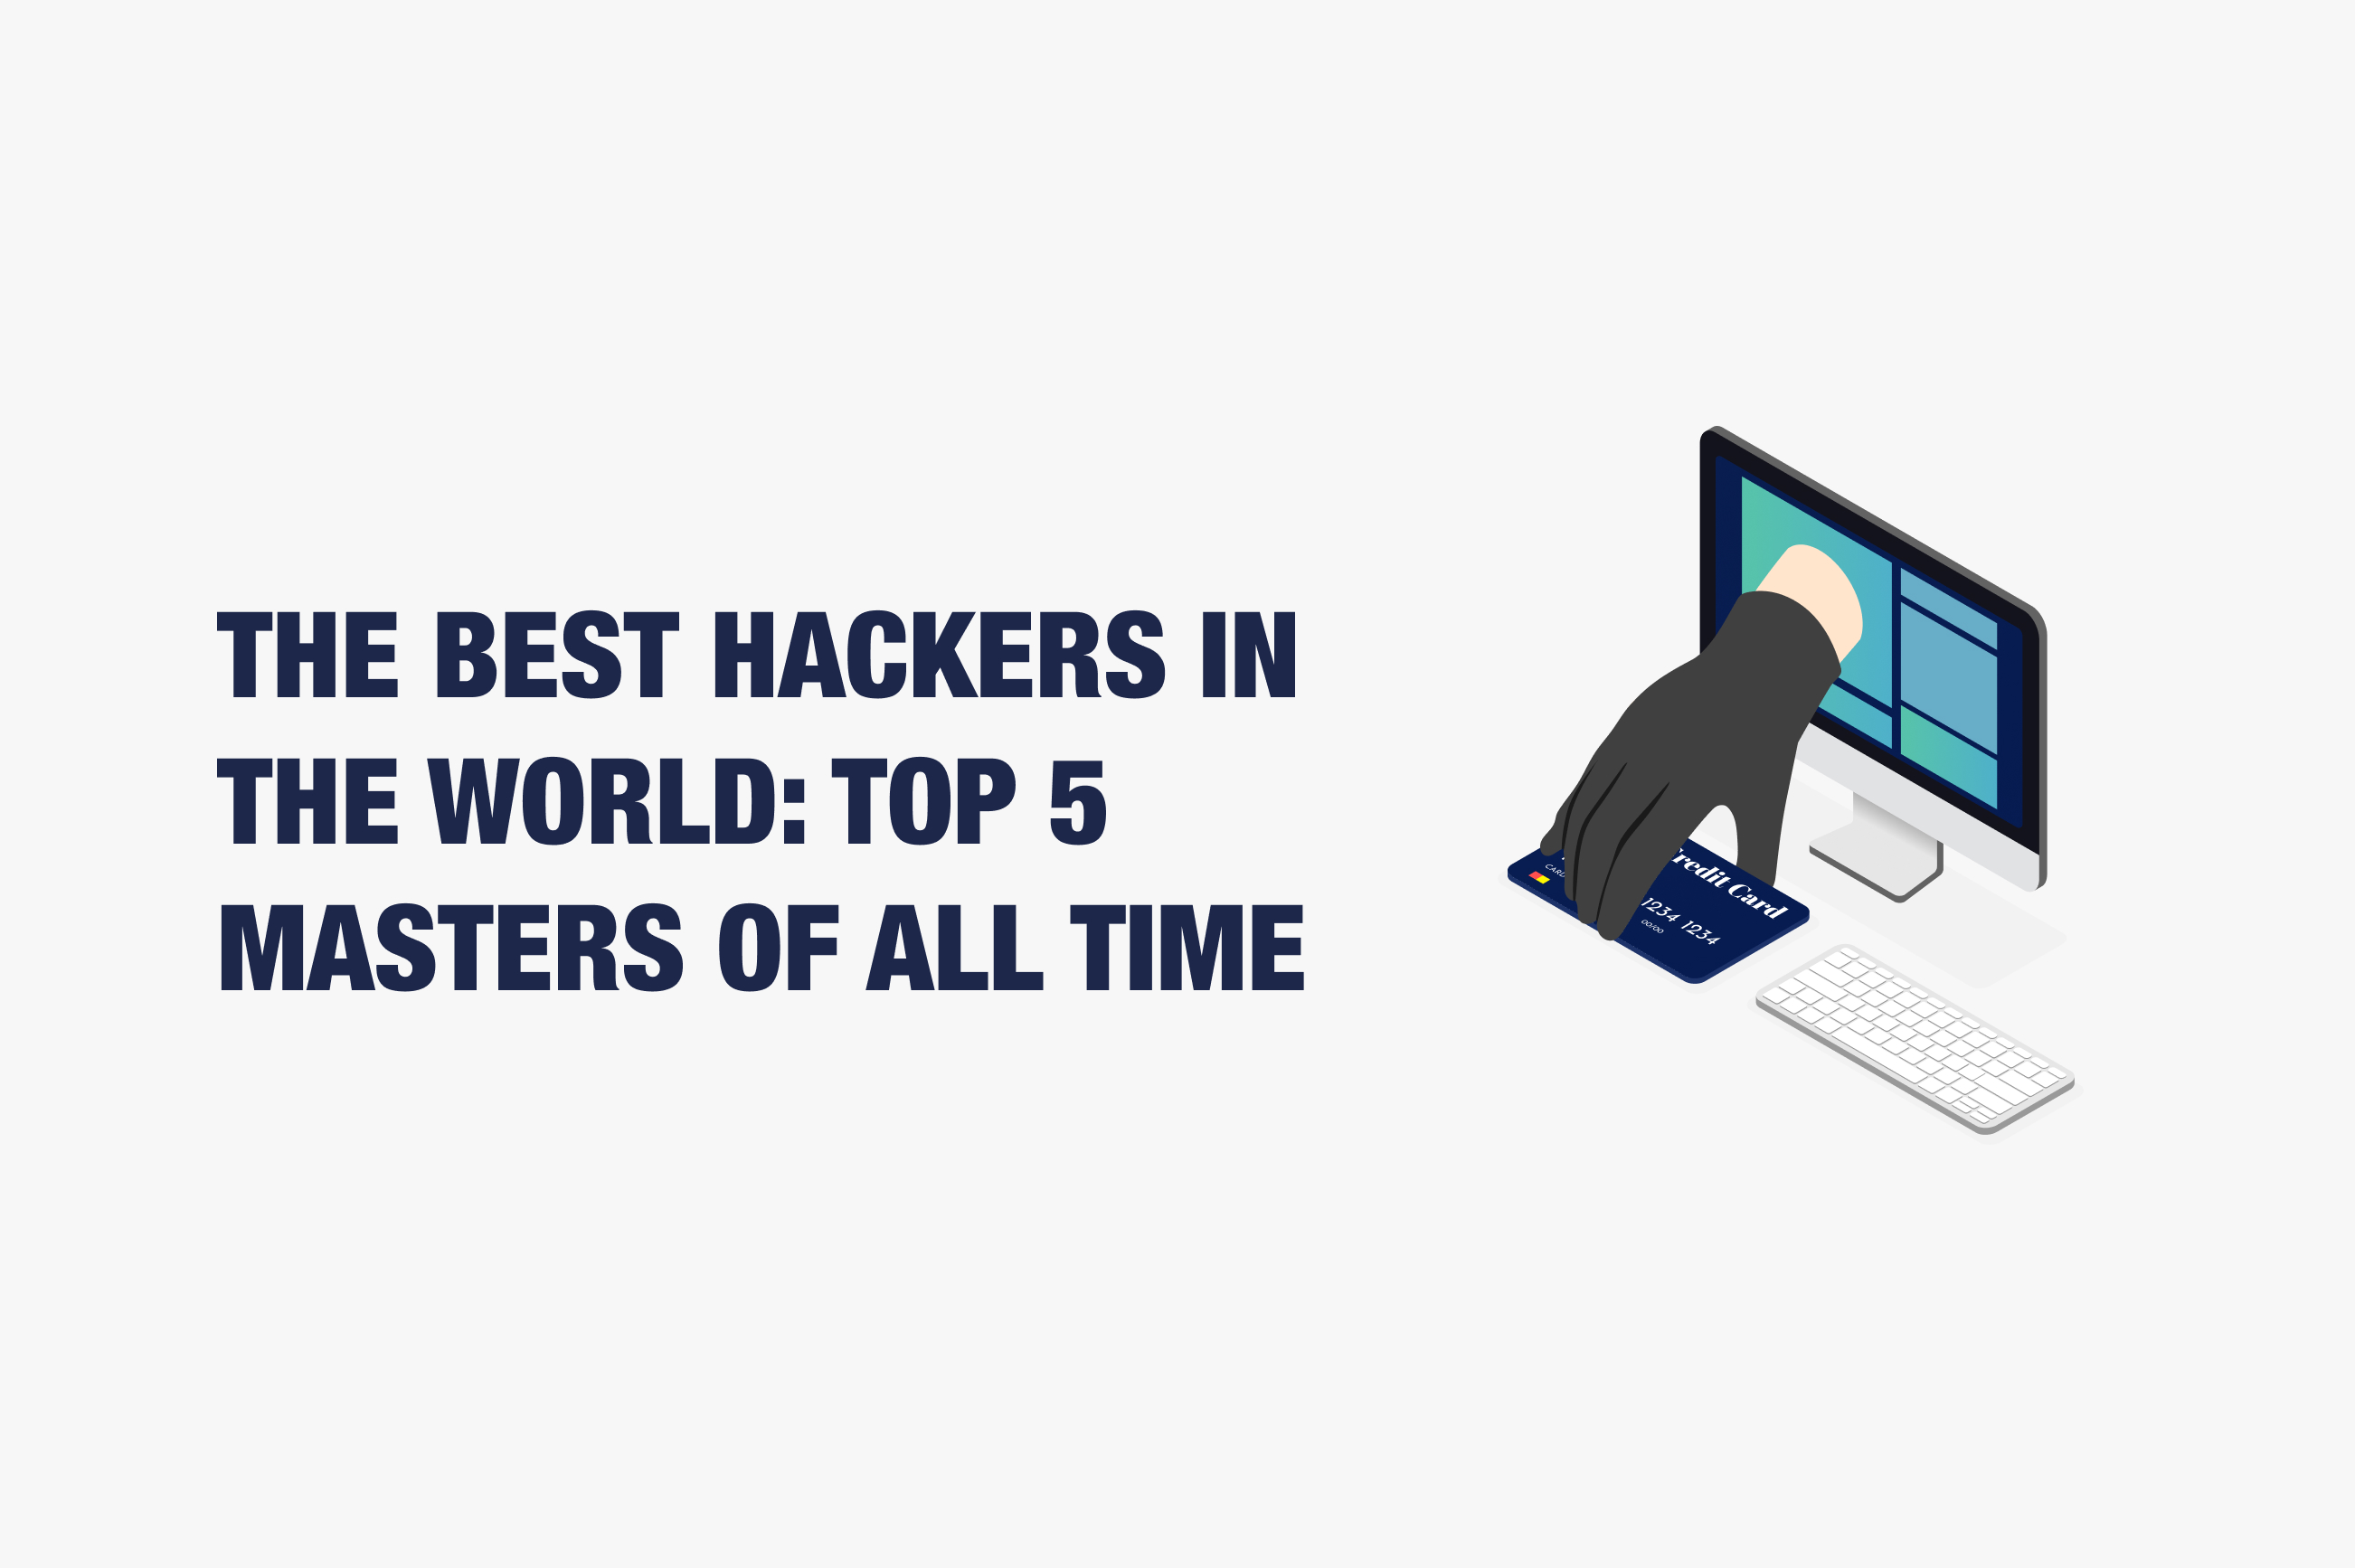 The Best Hackers in the World: TOP 5 Masters of All Time